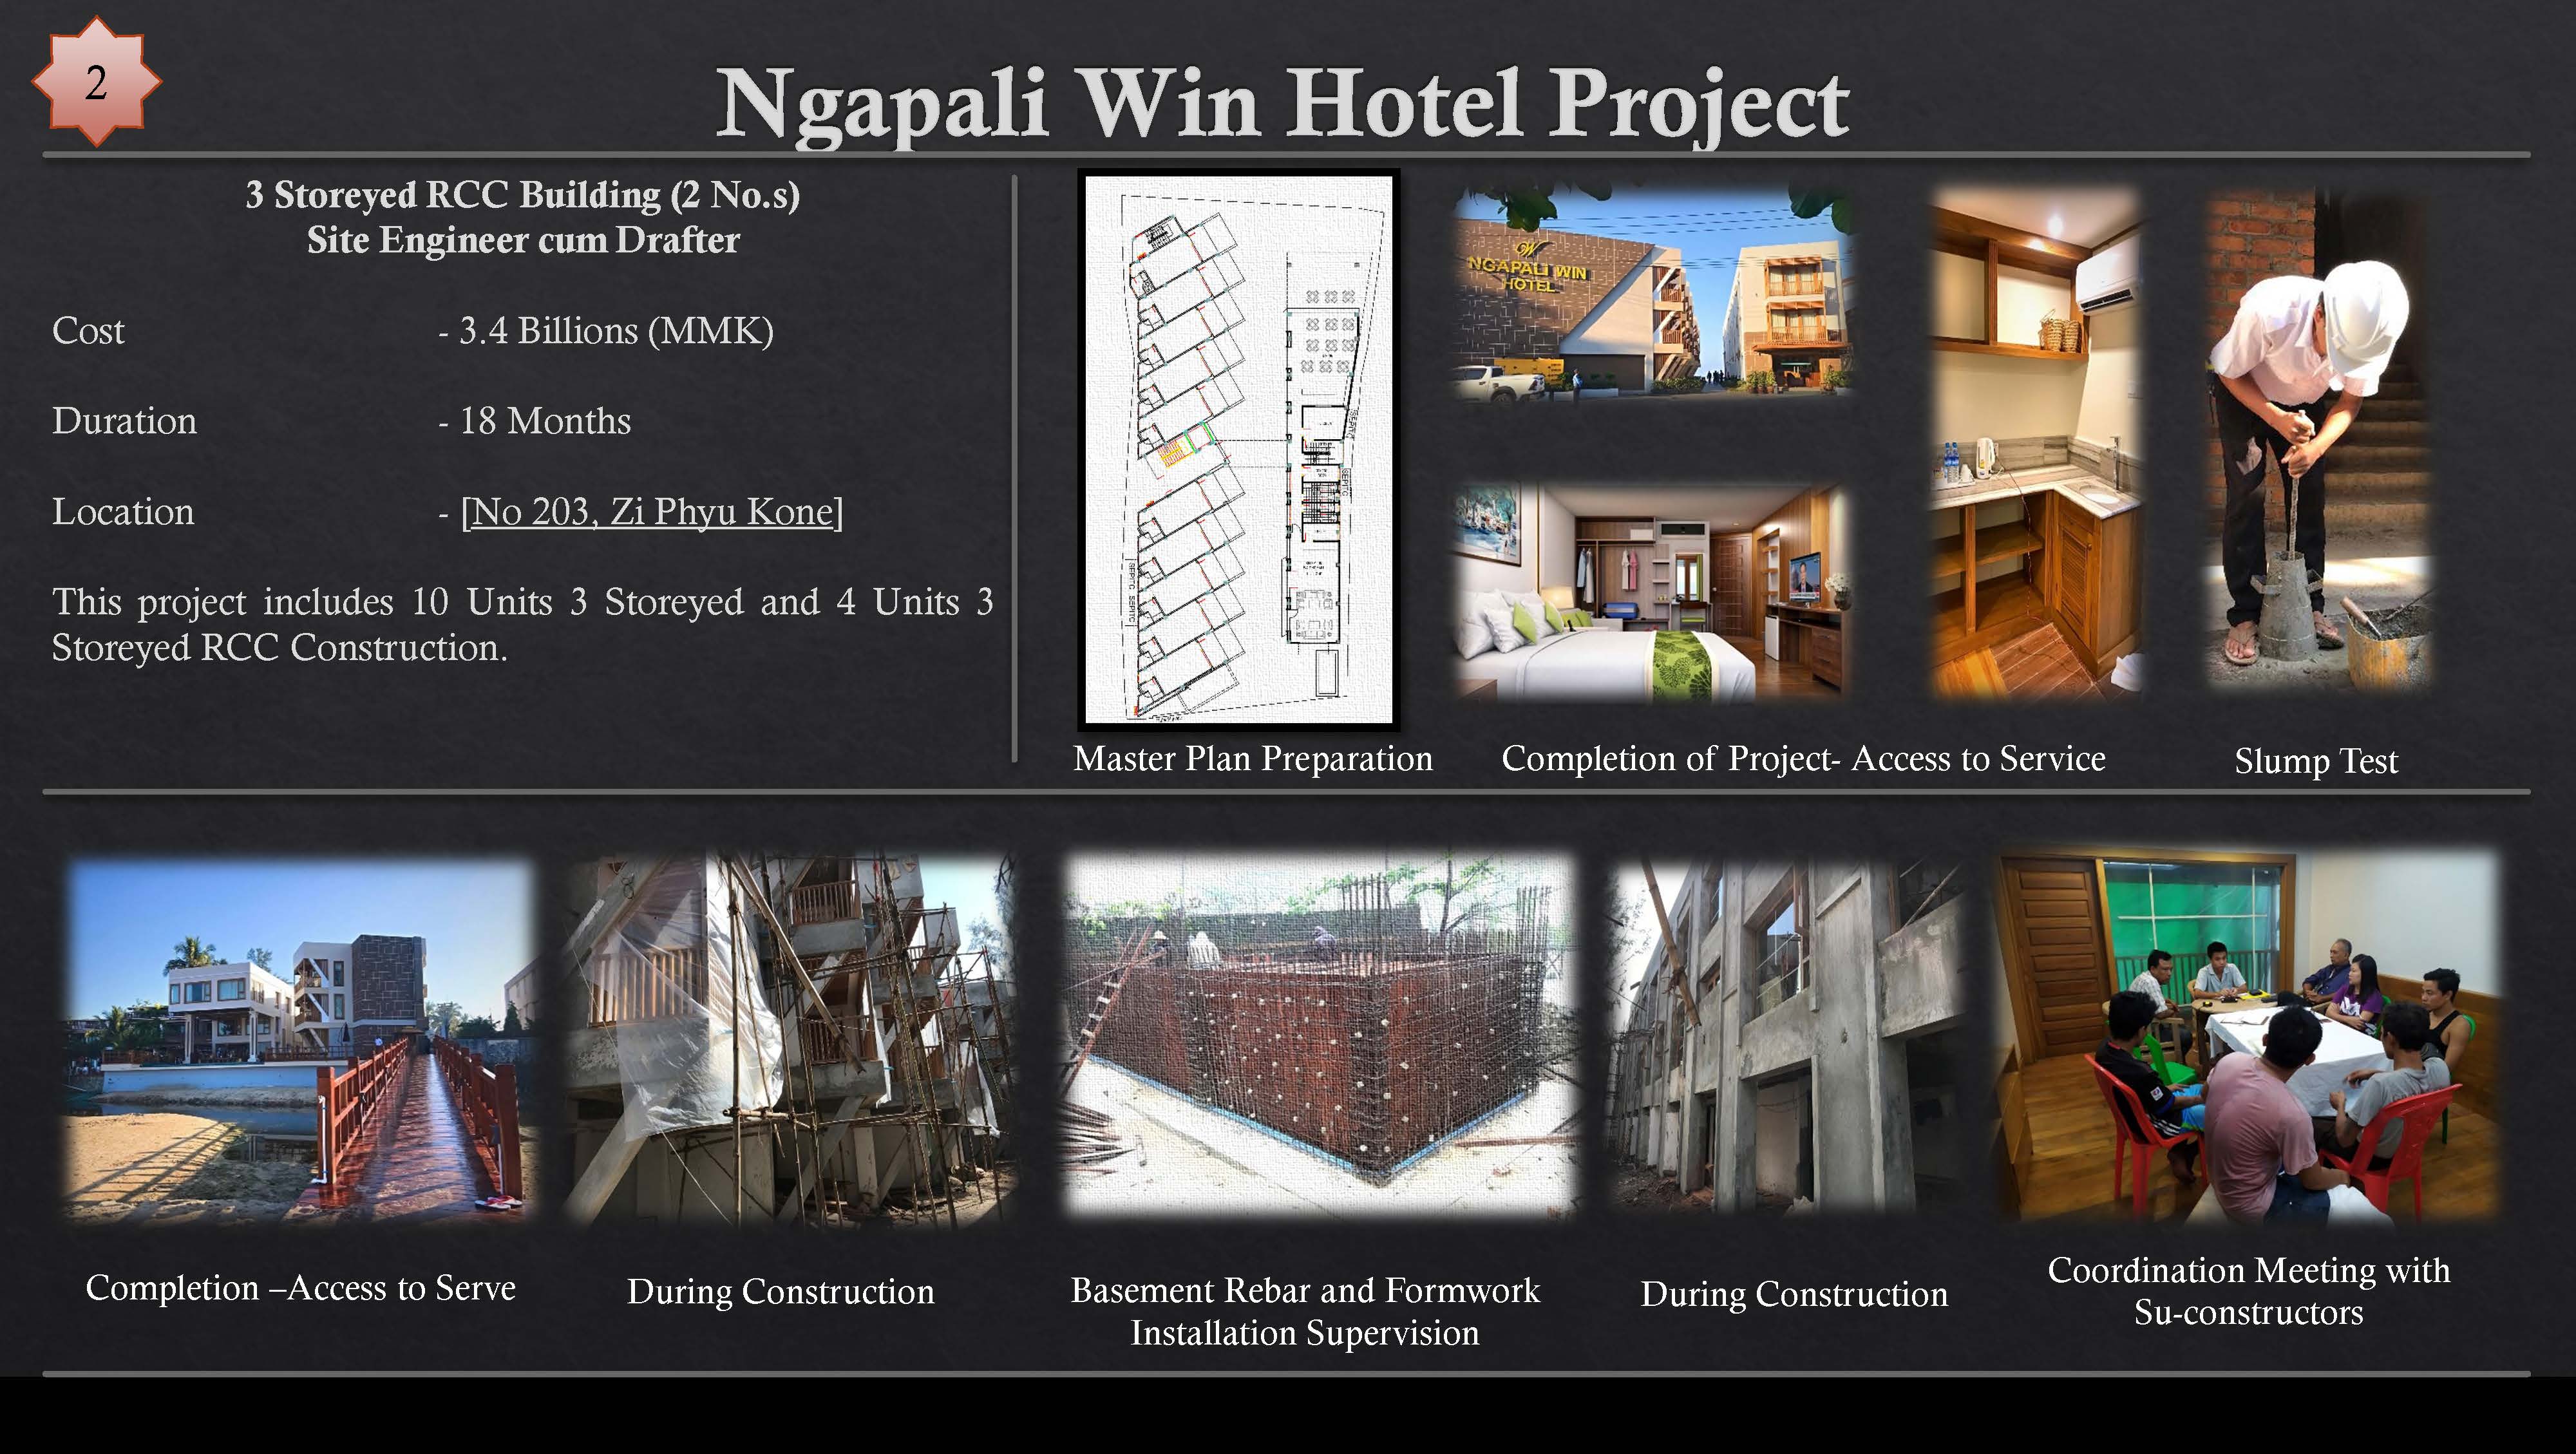 Negapali Win Hotel Project

3 Storeyed RCC Building (2 No.s)
NTCDA Taguig DIE 11a

(Glos - 3.4 Billions (MMK)
Duration - 18 Months
Location - [No 203, Zi Phyu Kone]

This project includes 10 Units 3 Storeyed and 4 Units 3
Storeyed RCC Construction.

 

Completion —Access to Serve During Construction

|

\

*

\

p
©
=
2
iL”
EA

Pos

Master Plan Preparation Completion of Project- Access to Service

 

Basement Rebar and Formwork
Installation Supervision

 

During Construction

  

 

Coordination Meeting with
Su-constructors